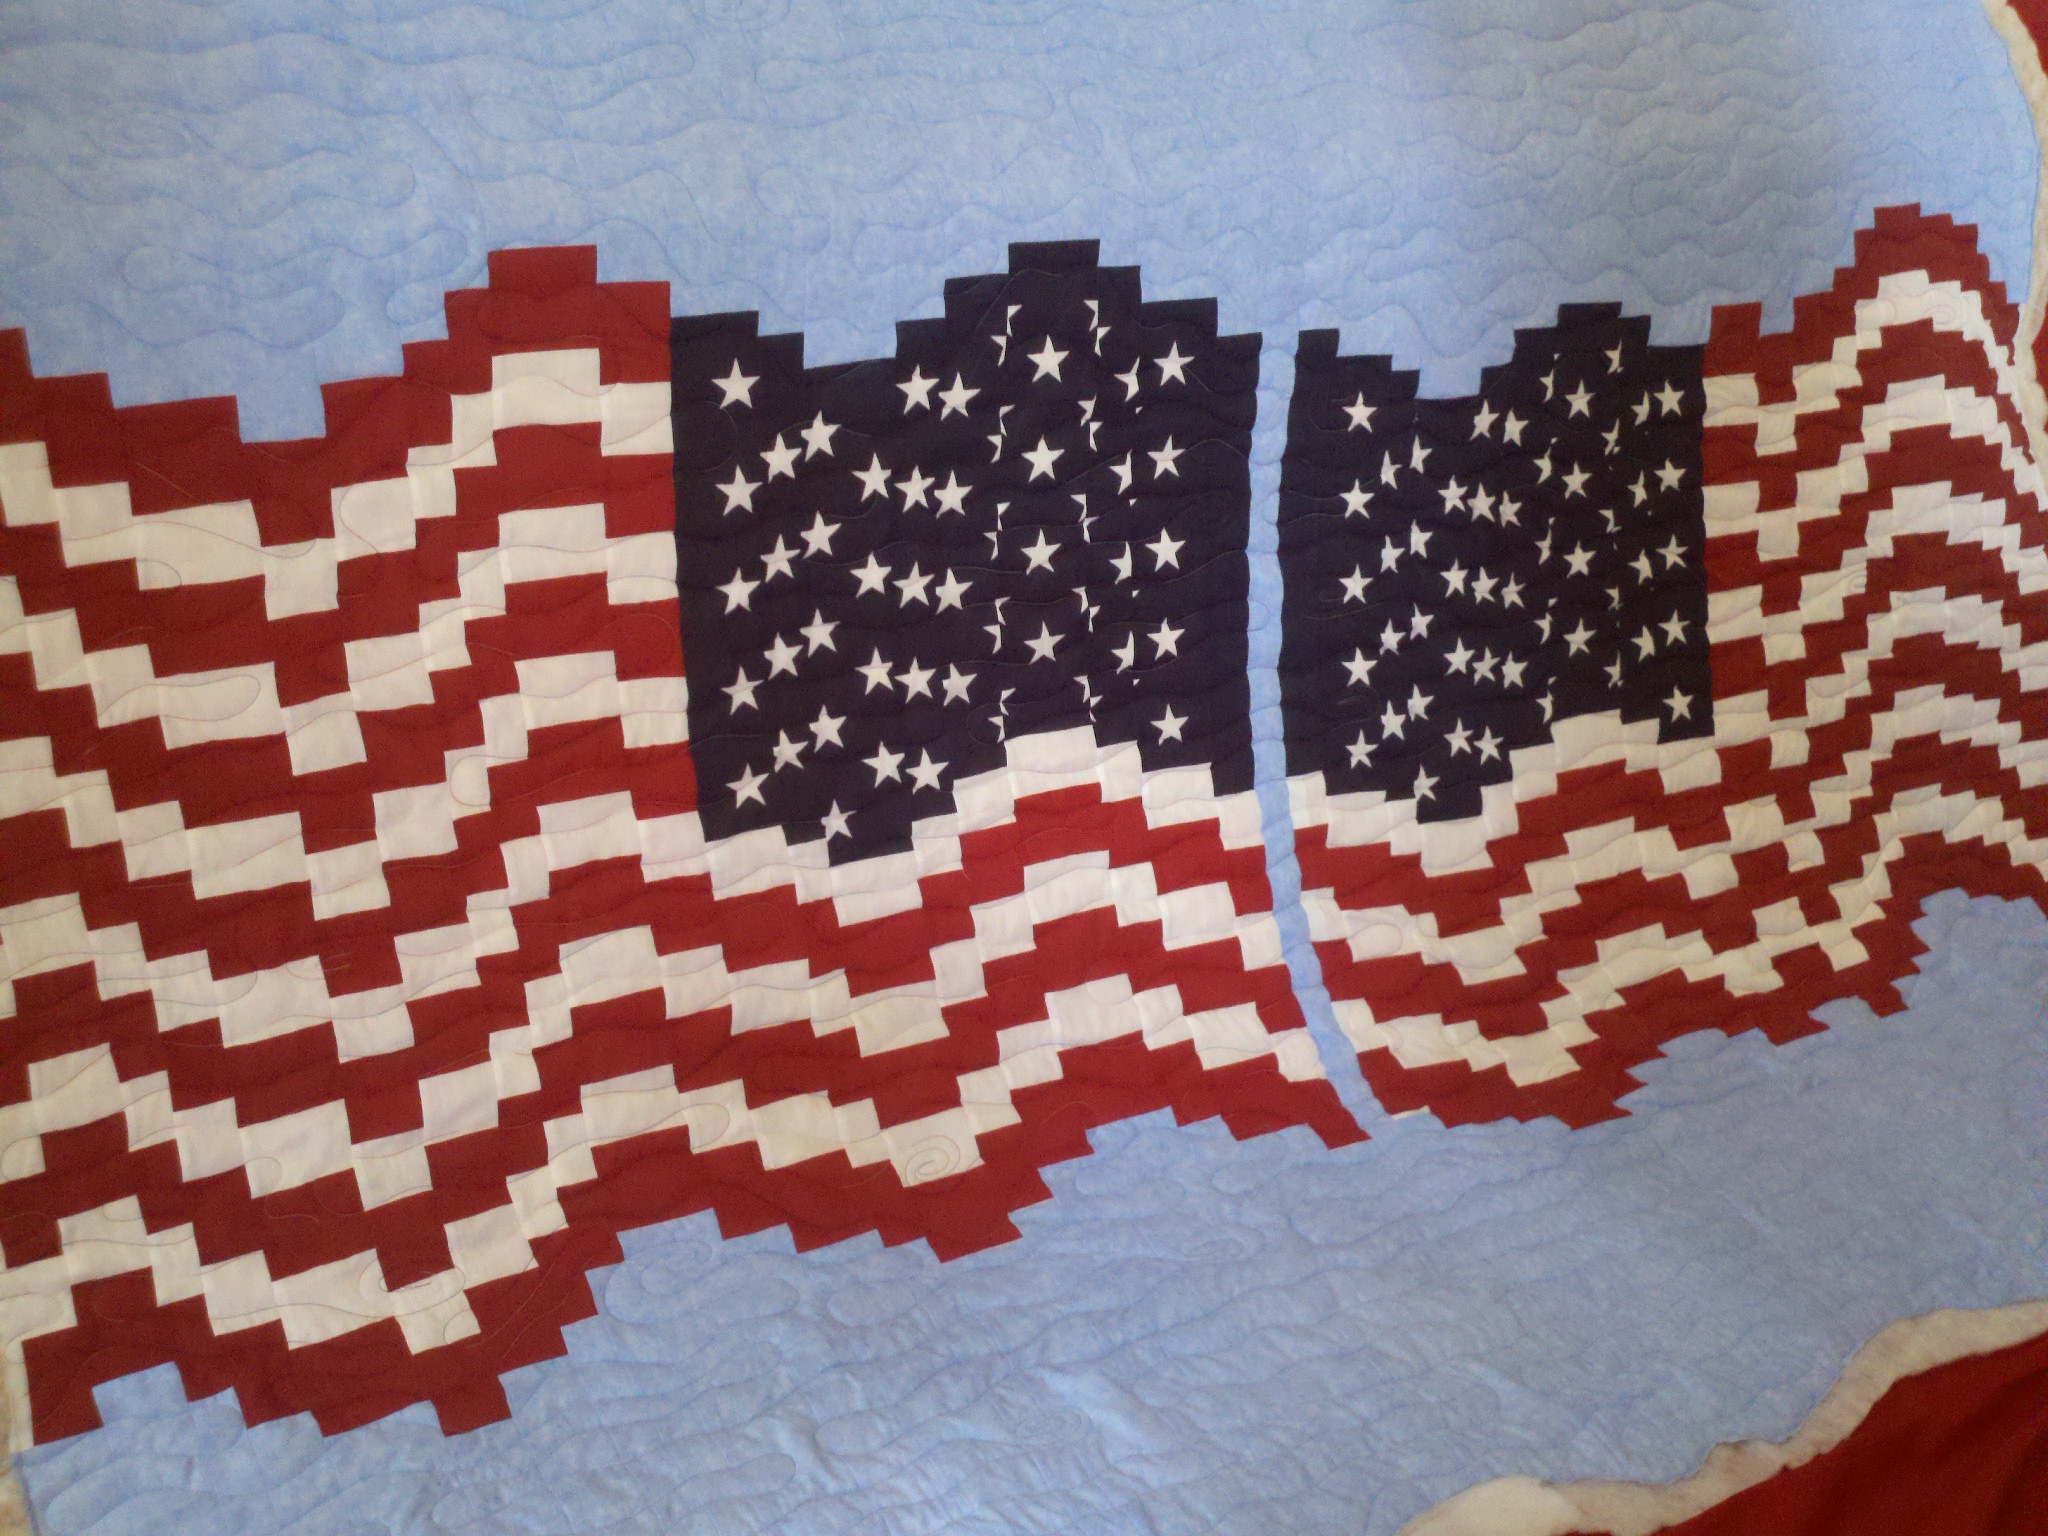 American Flag QOV quilted by Maria Denise Hall